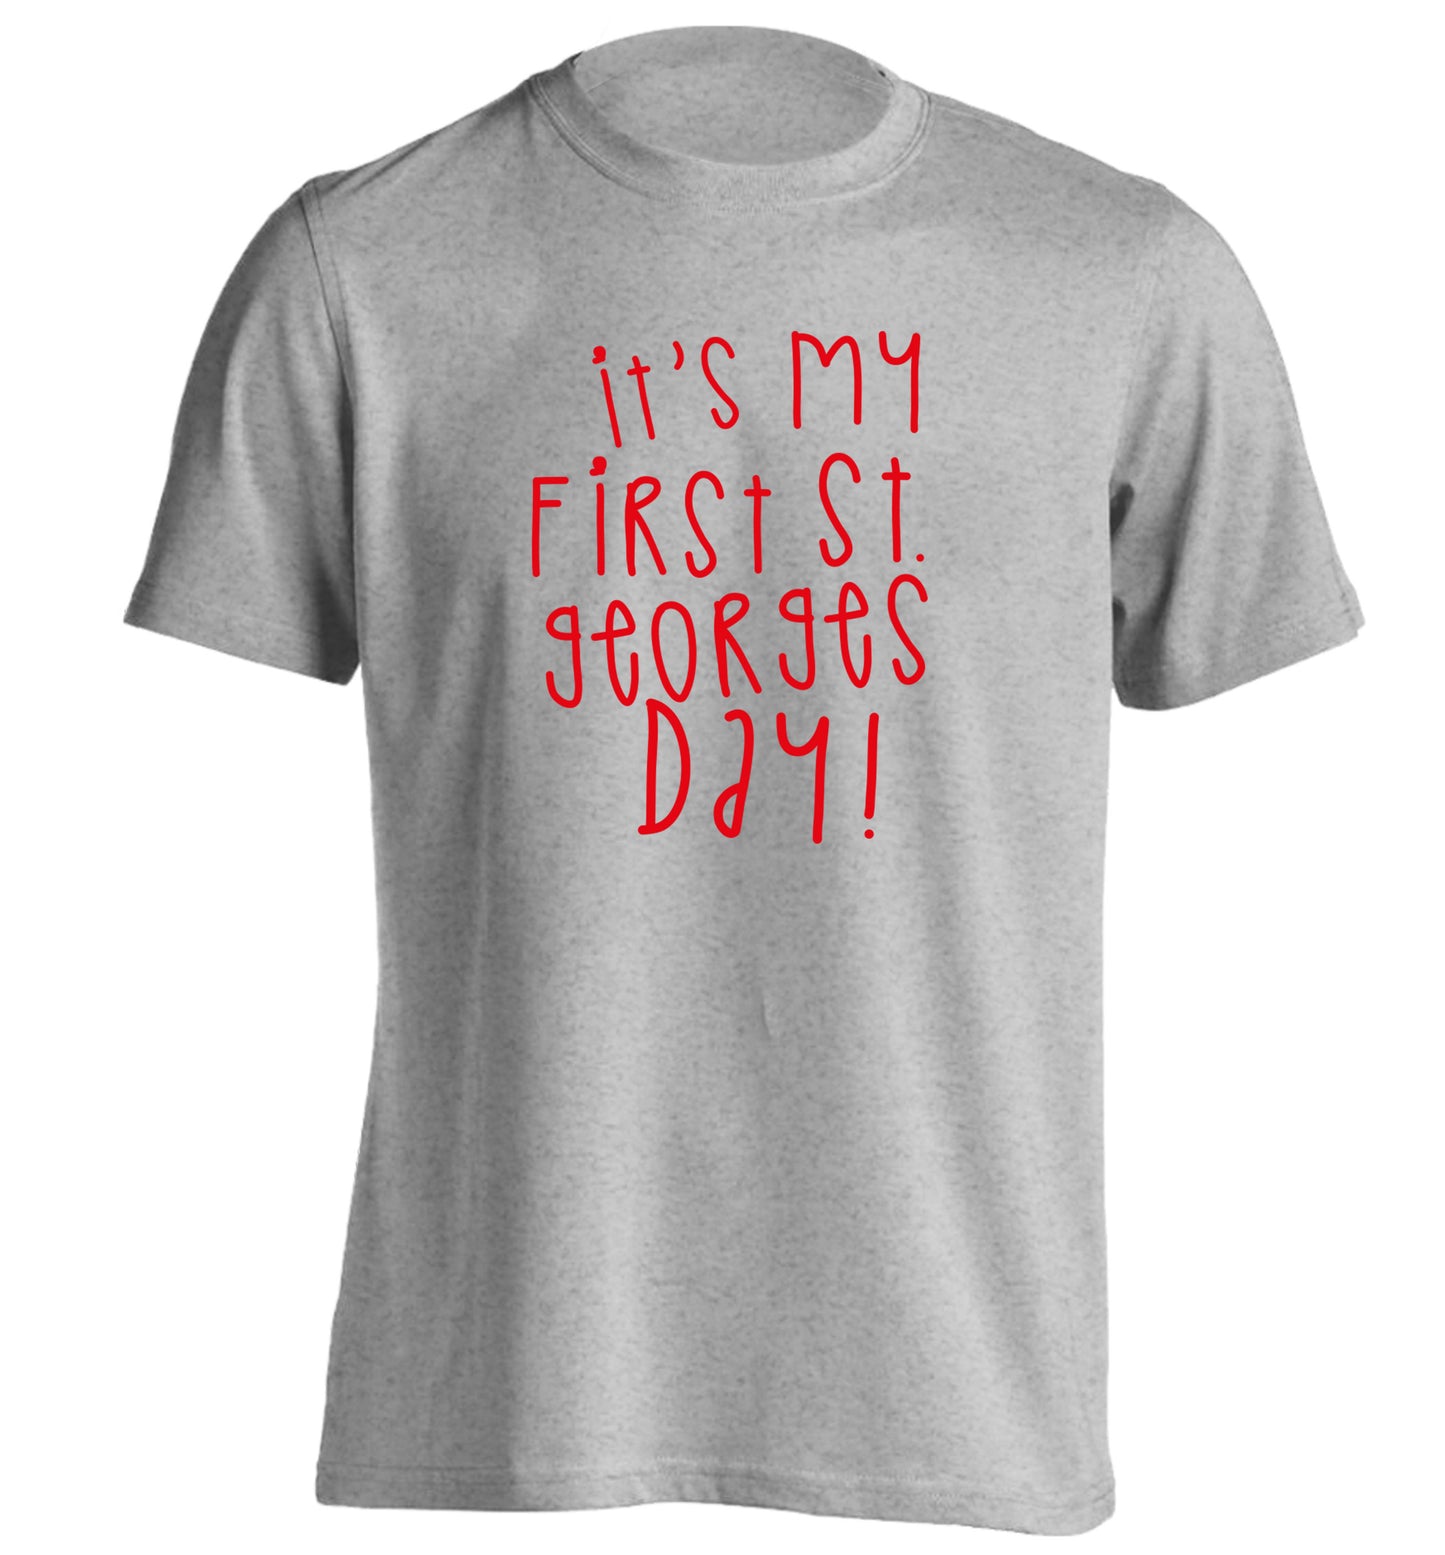 It's my first St Georges day adults unisex grey Tshirt 2XL